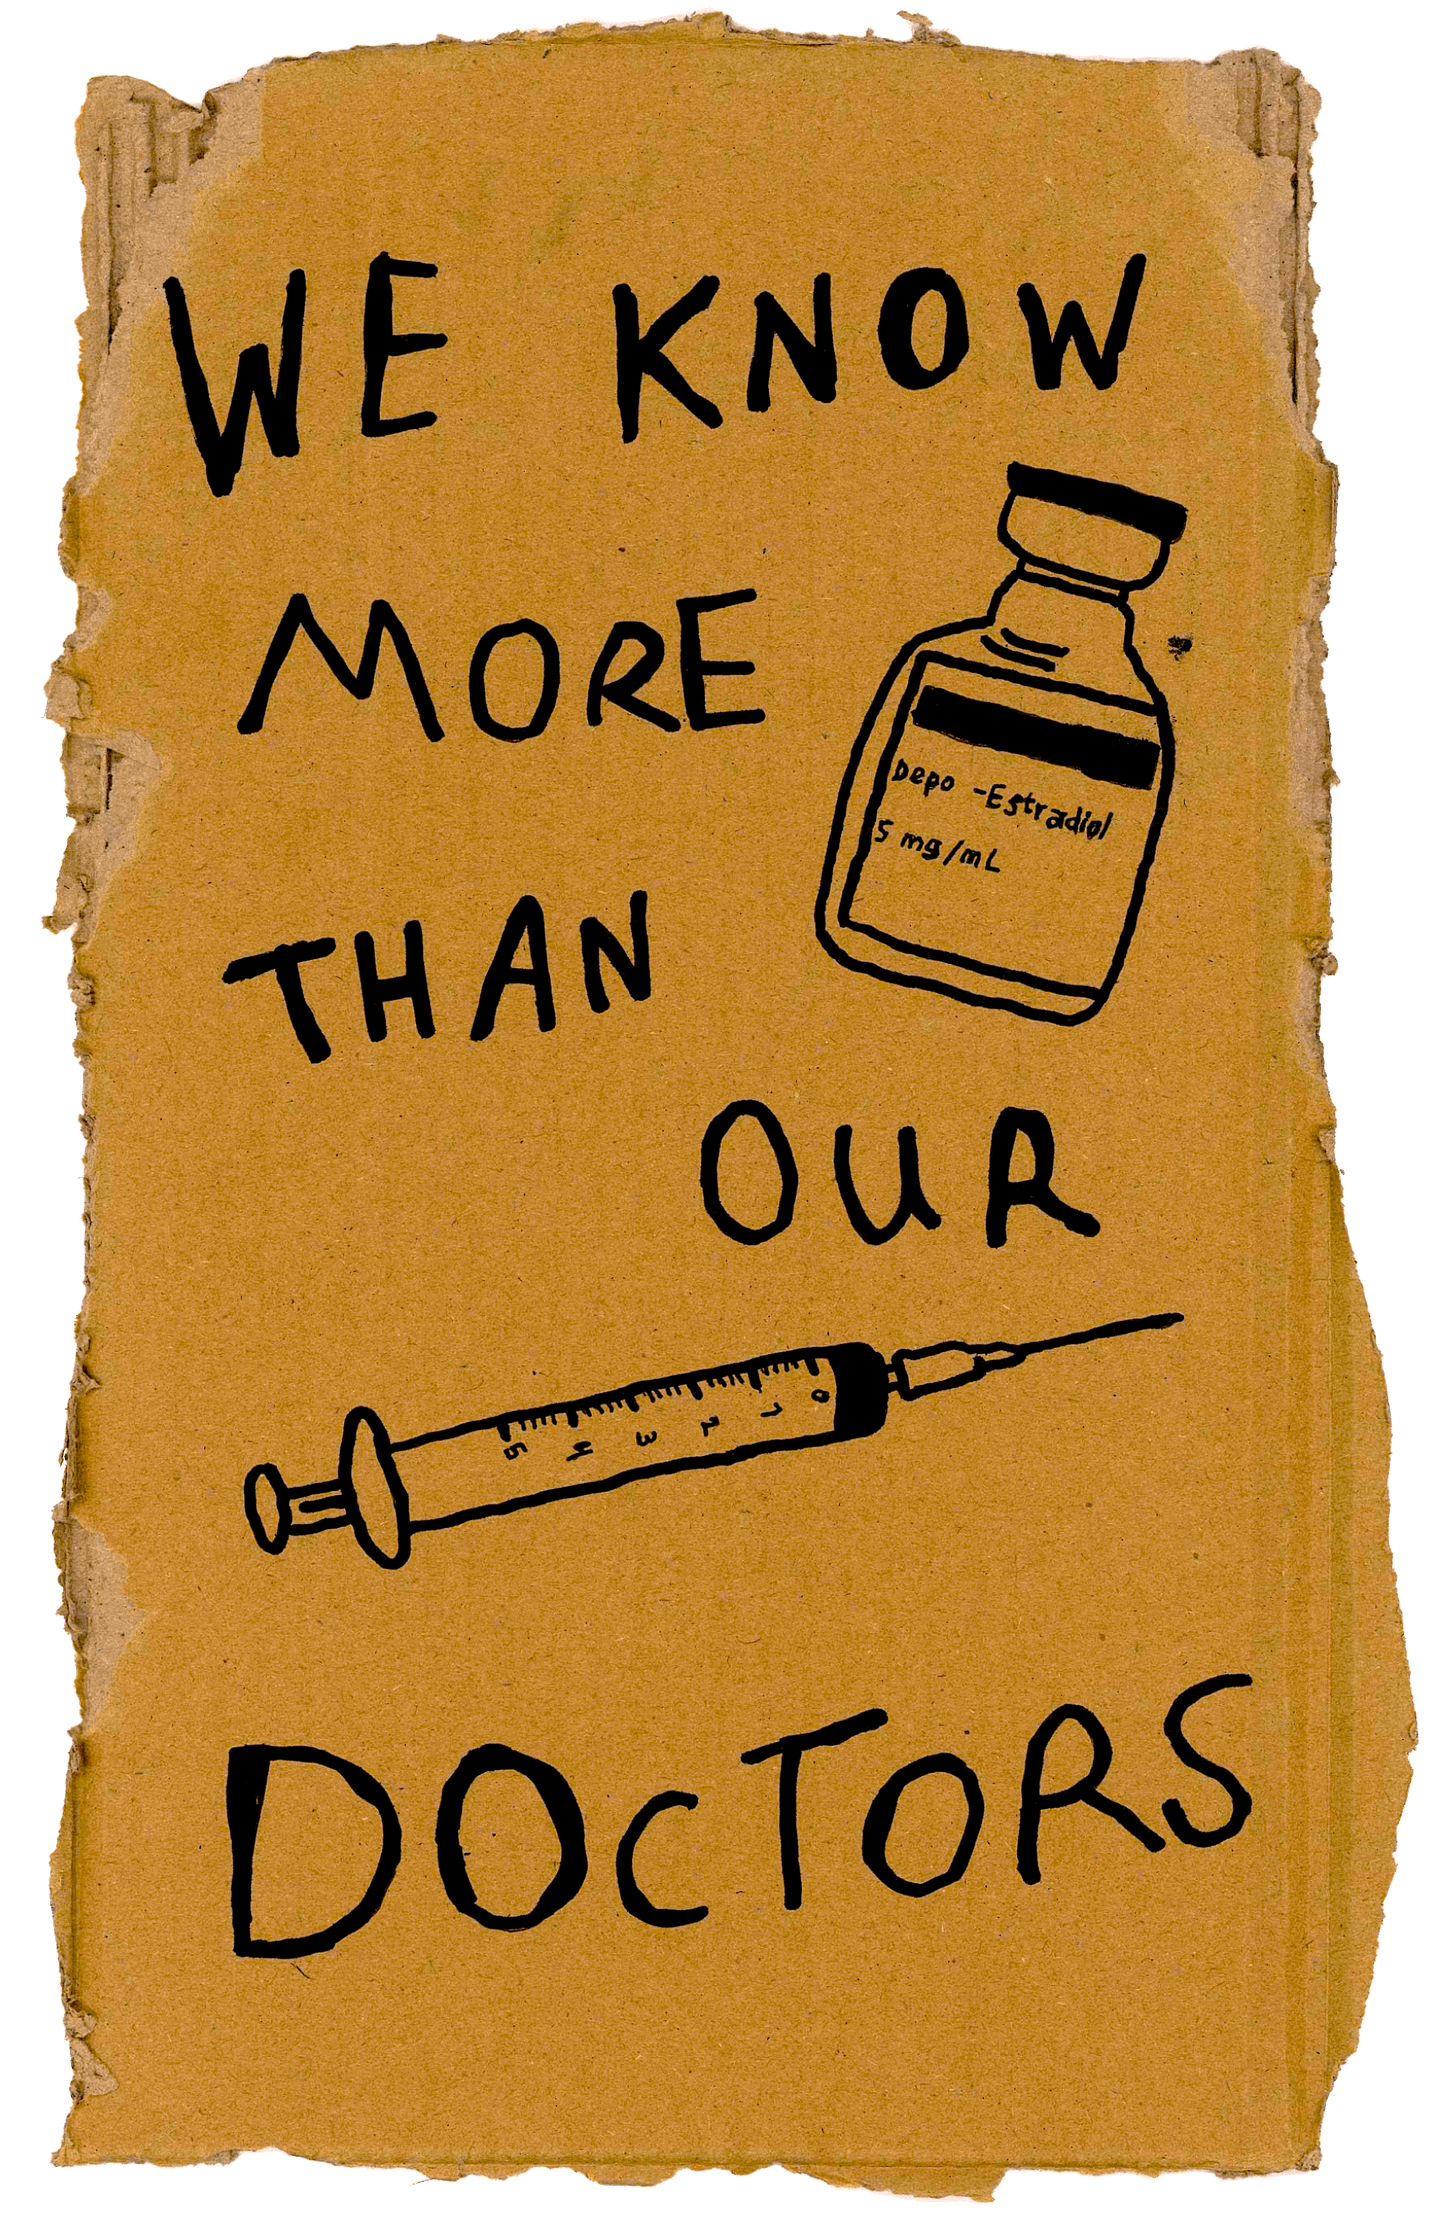 A photo of a torn piece of cardboard being used as a sign, which says “We know more than our doctors” in all caps, written in black ink. It also shows drawn images of a syringe and a bottle of estradiol.